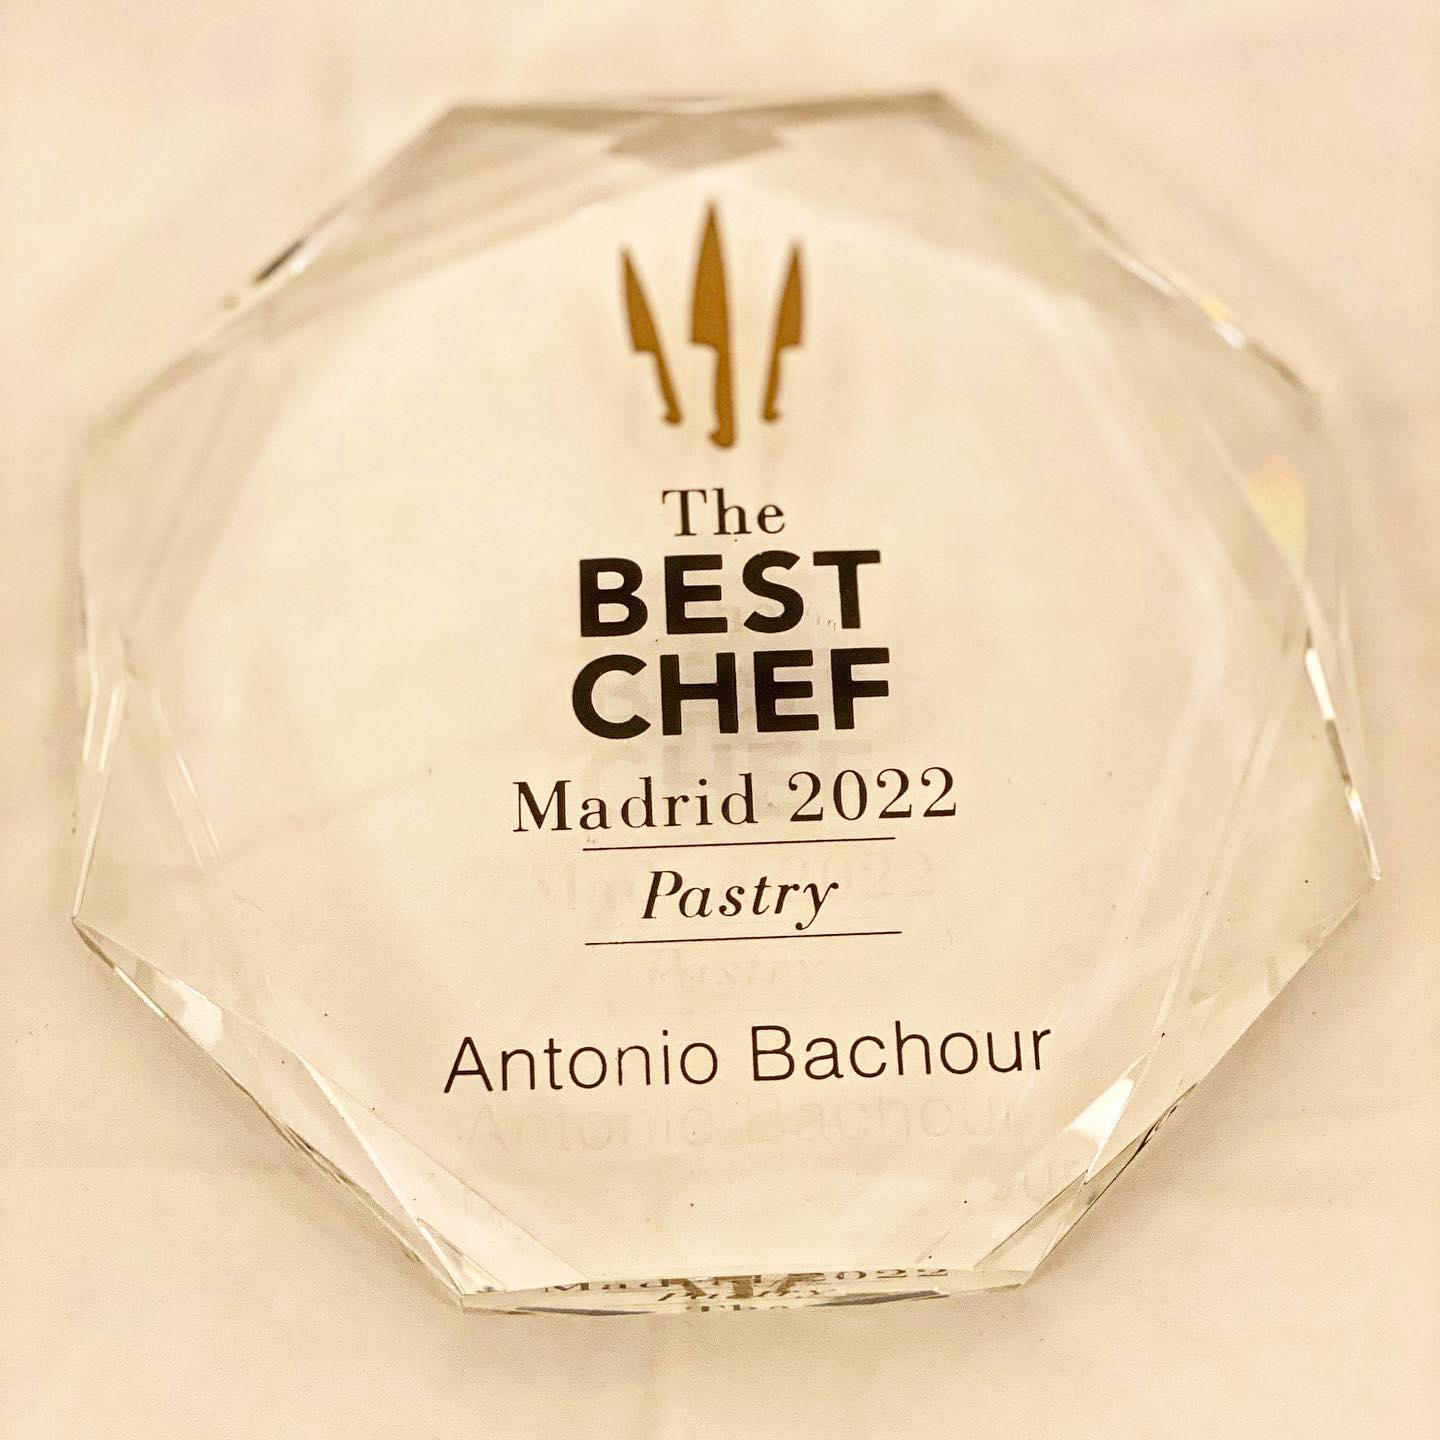 Antonio Bachour - Tonight I received the recognition of the Best Pastry Chef of the world 2022, also